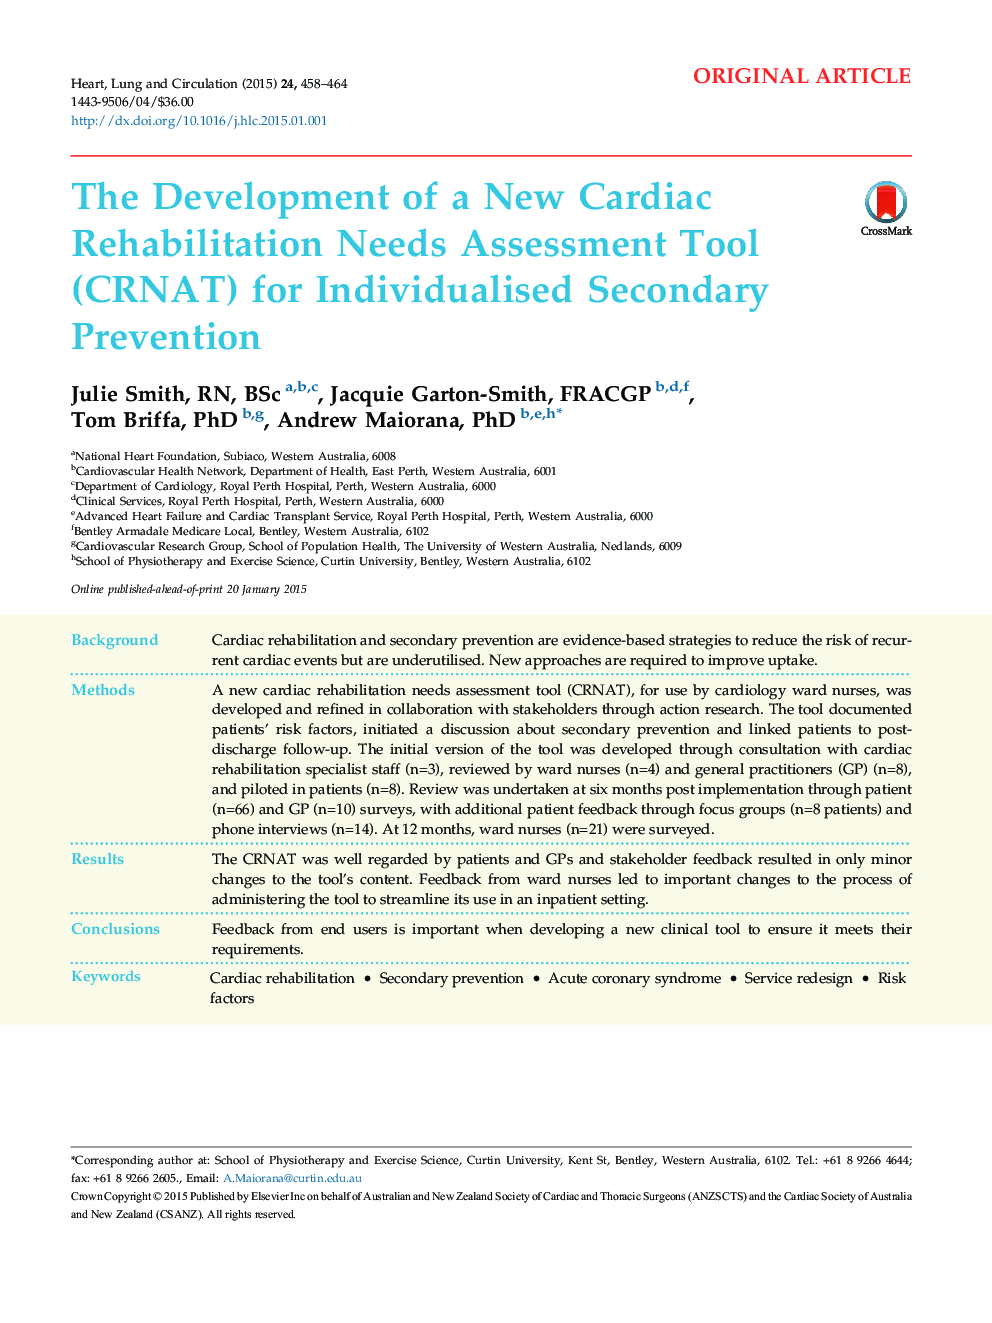 The Development of a New Cardiac Rehabilitation Needs Assessment Tool (CRNAT) for Individualised Secondary Prevention